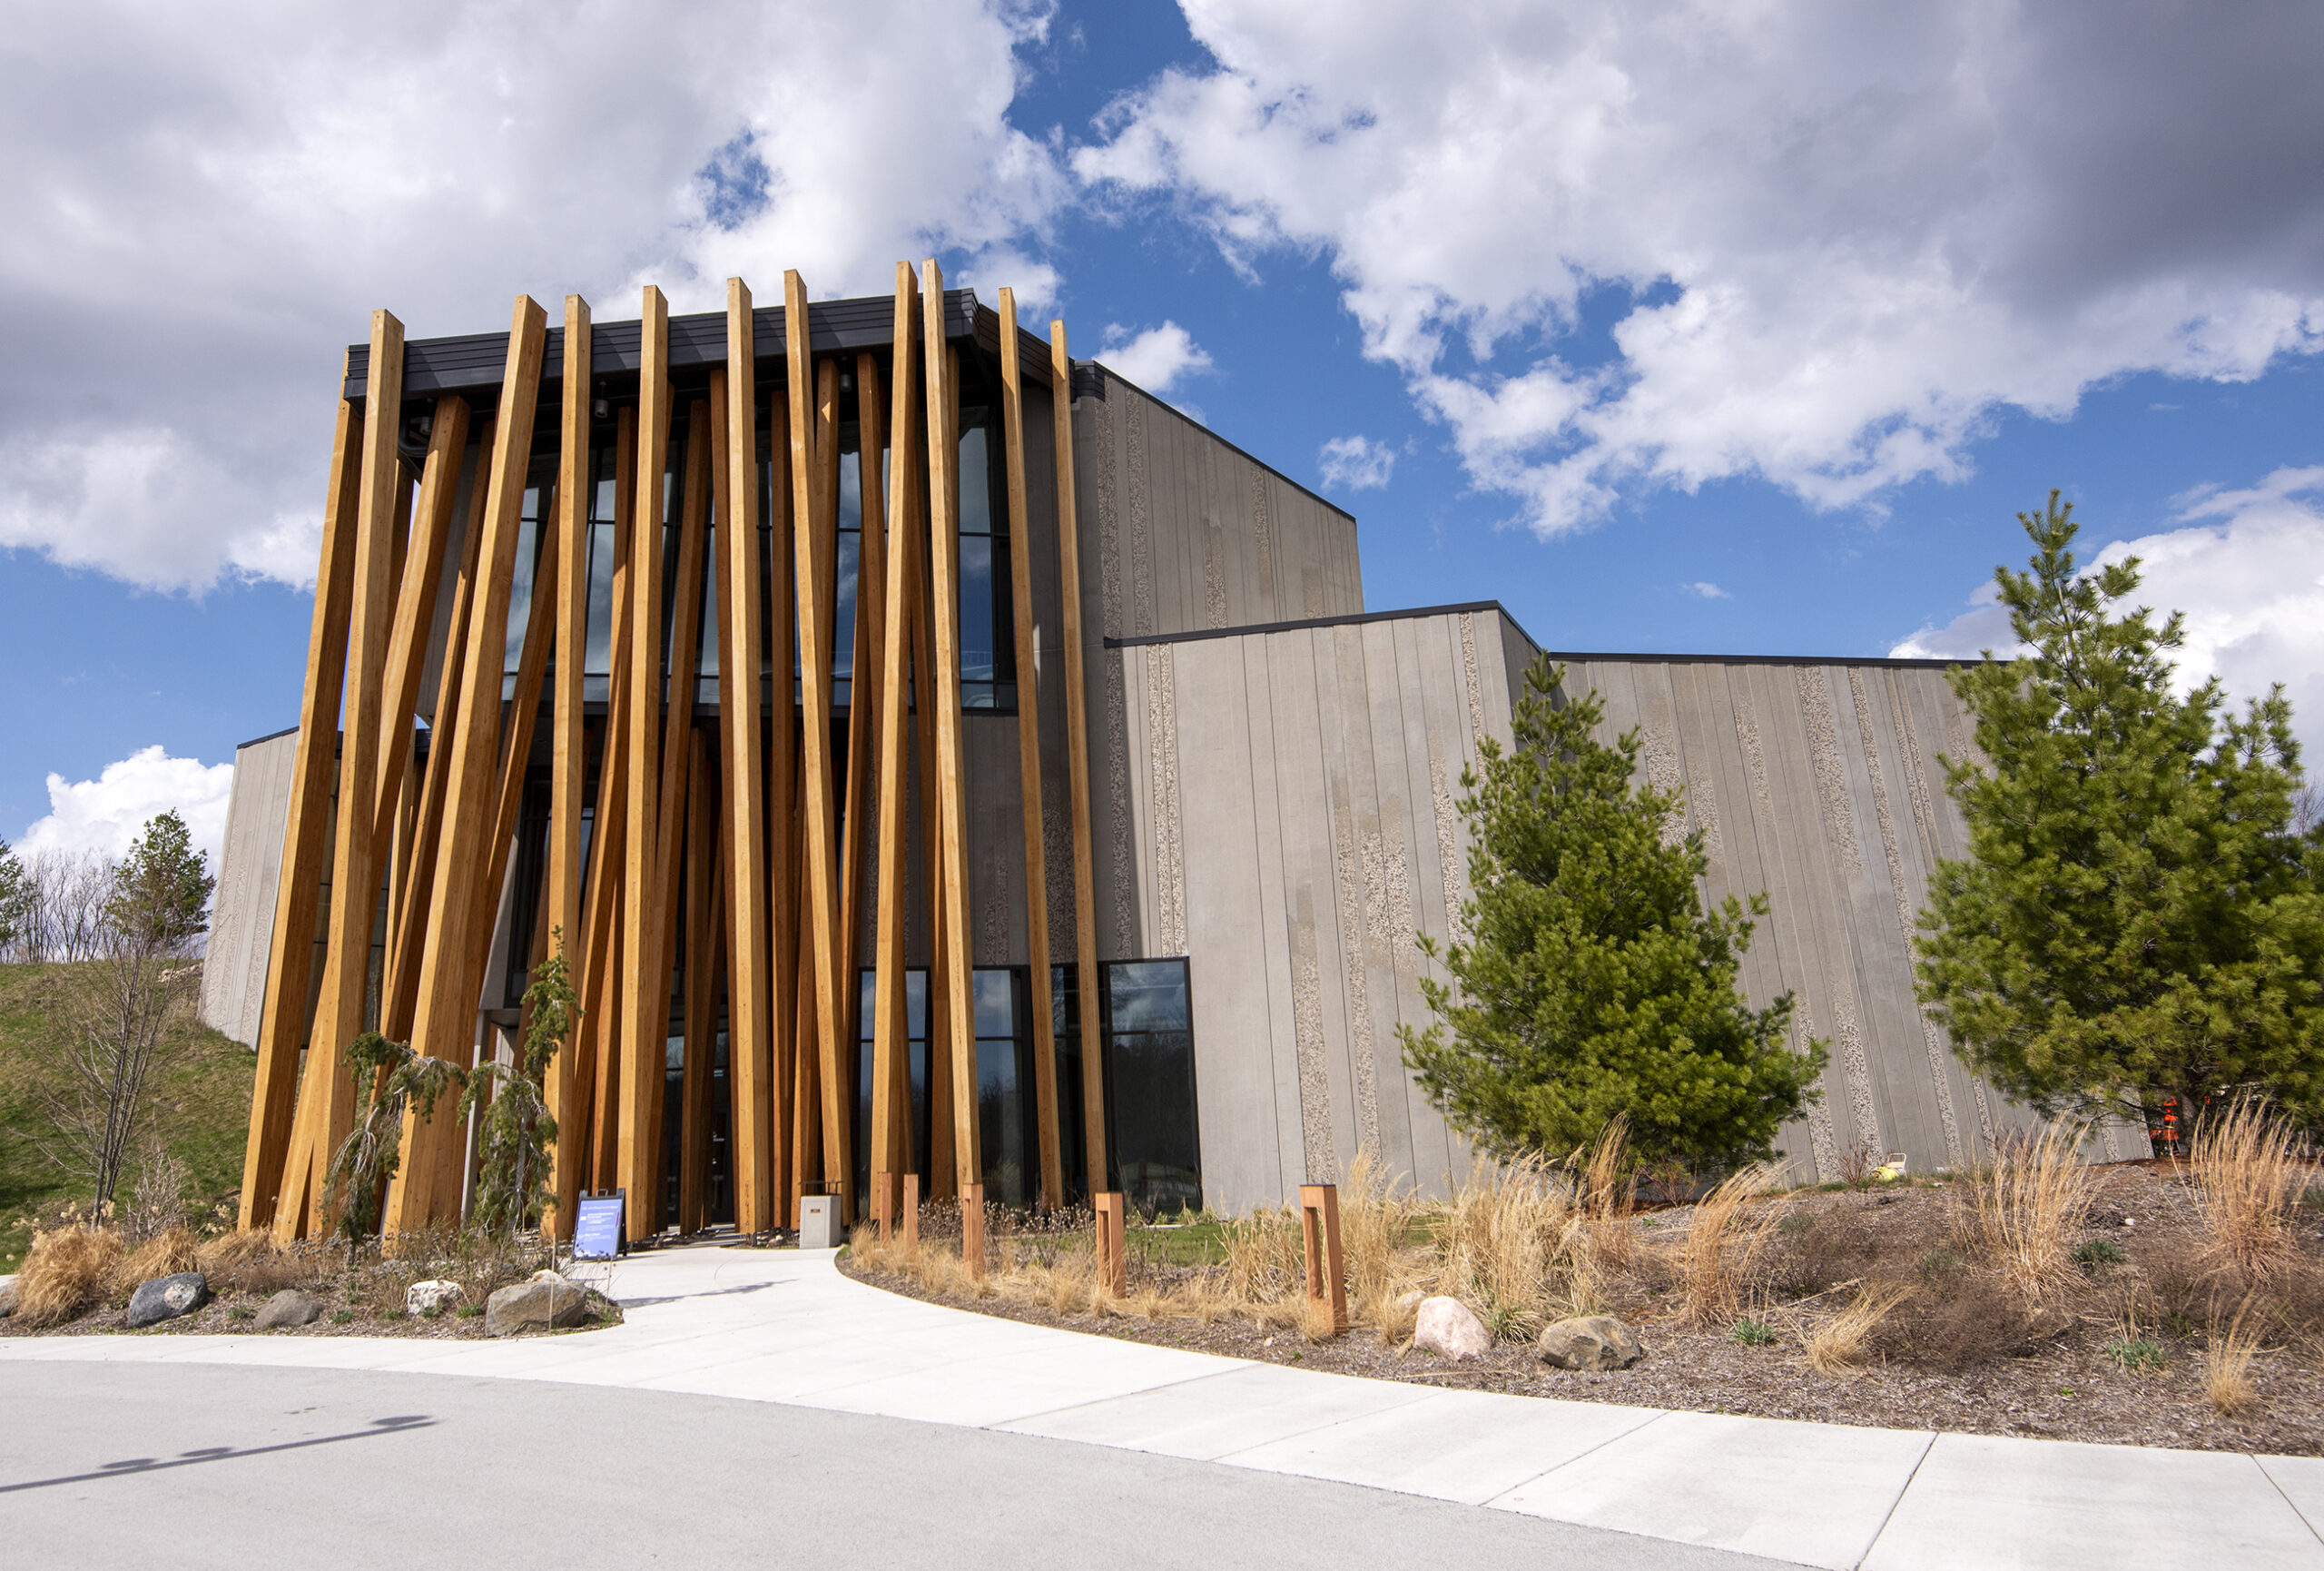 Large wooden beams are the front facade of a modern museum building.